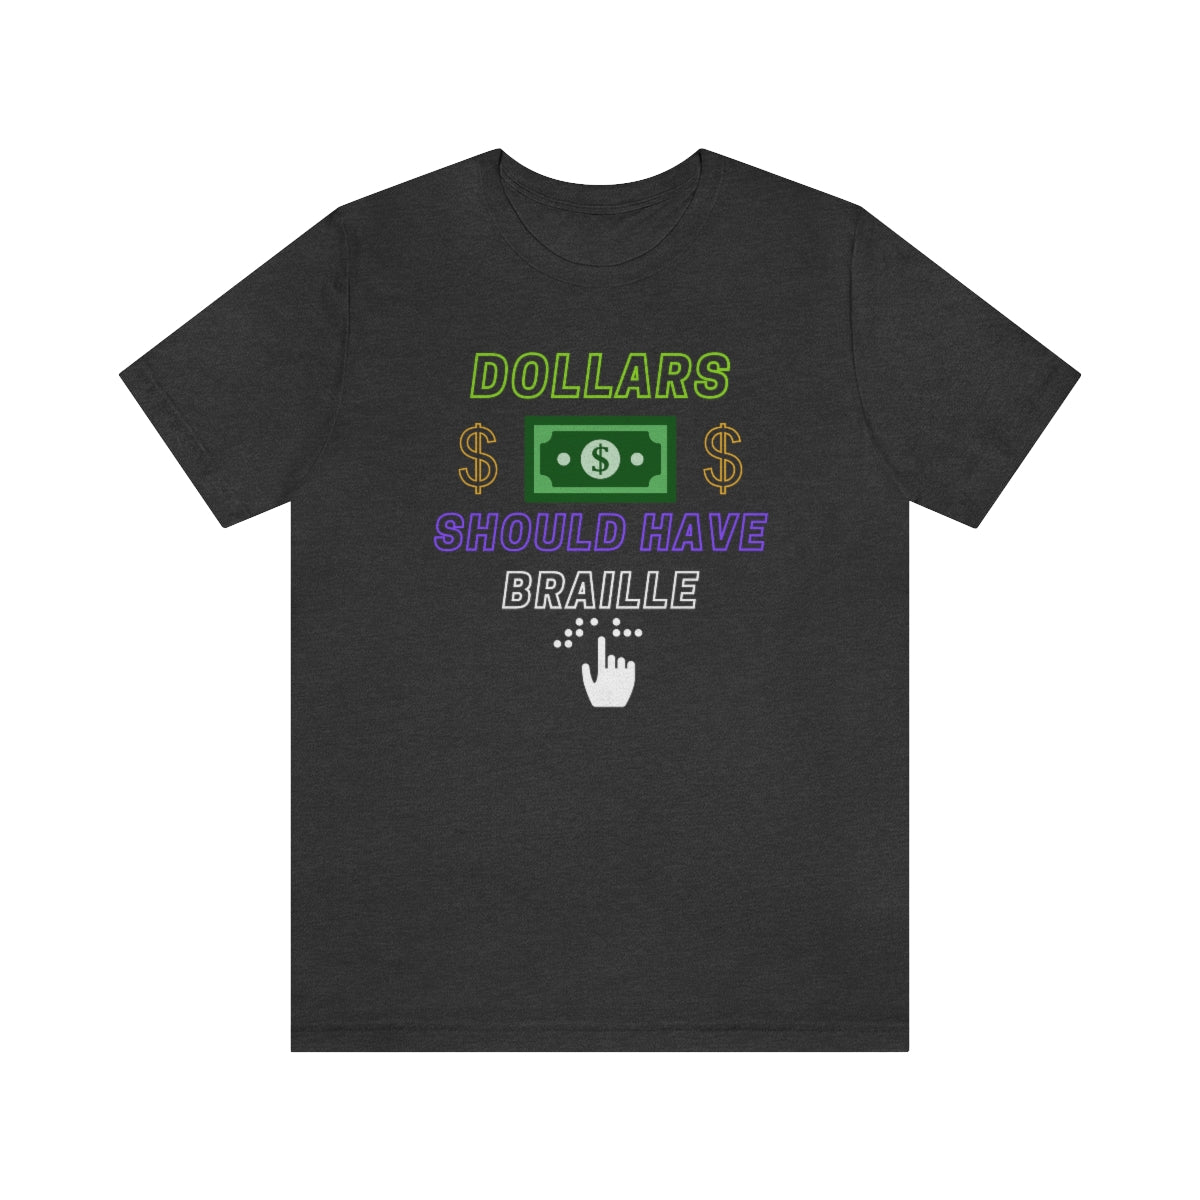 A dark grey heather shirt with the text "Dollars should have braille" with a dollar bill image, around that 2 gold dollarsigns. On the bottom, under 'braille' is a drawing of a hand reading braille.